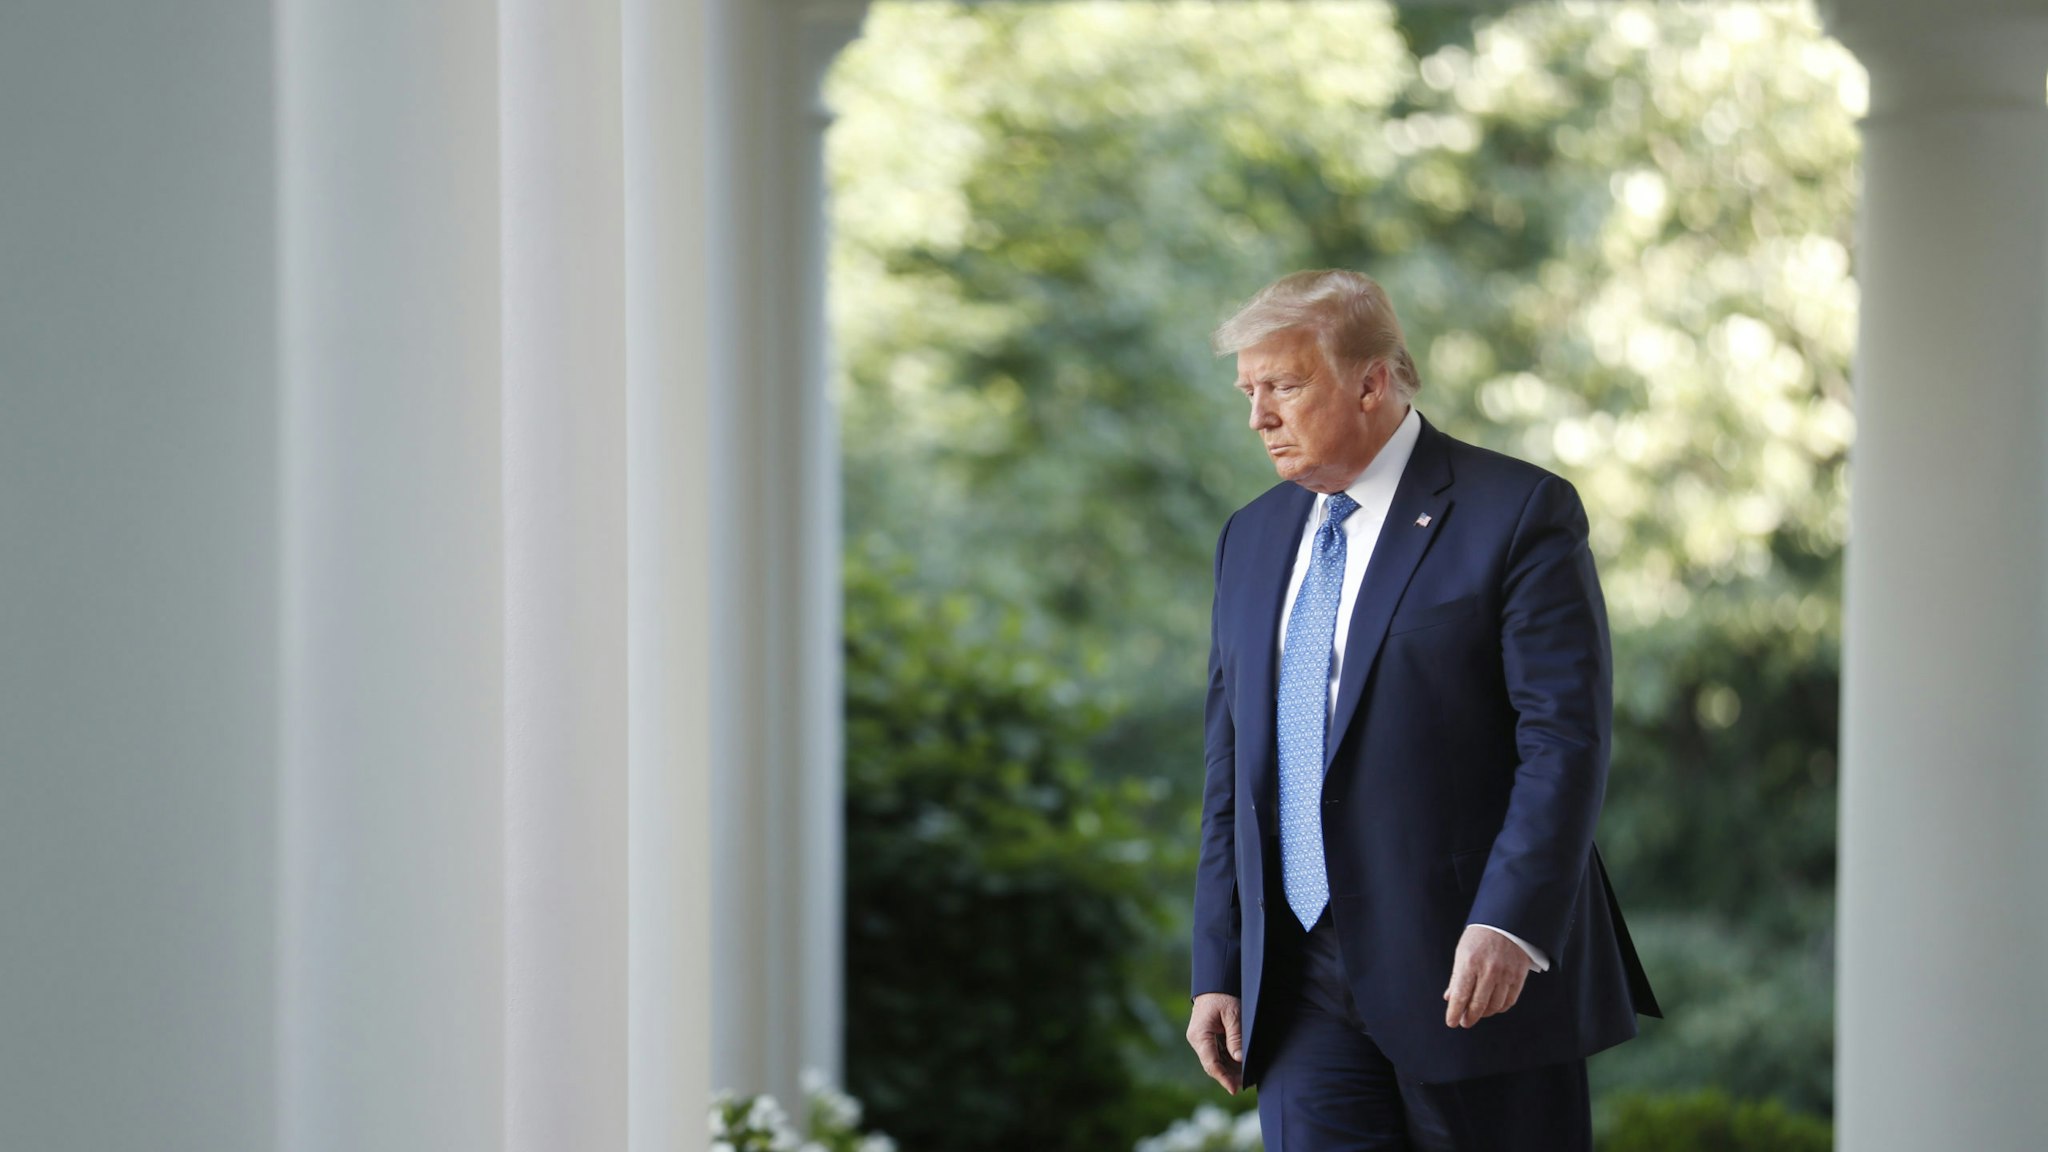 U.S. President Donald Trump arrives to a news conference in the Rose Garden of the White House in Washington, D.C., U.S., on Monday, June 1, 2020. Trump has seized on protests against police brutality toward people of color to portray himself as an icon of law and order, eschewing the soothing role past presidents have adopted in similar moments as he seeks to turn the election-year conversation from his widely panned handling of the coronavirus outbreak. Photographer: Shawn Thew/EPA/Bloomberg via Getty Images